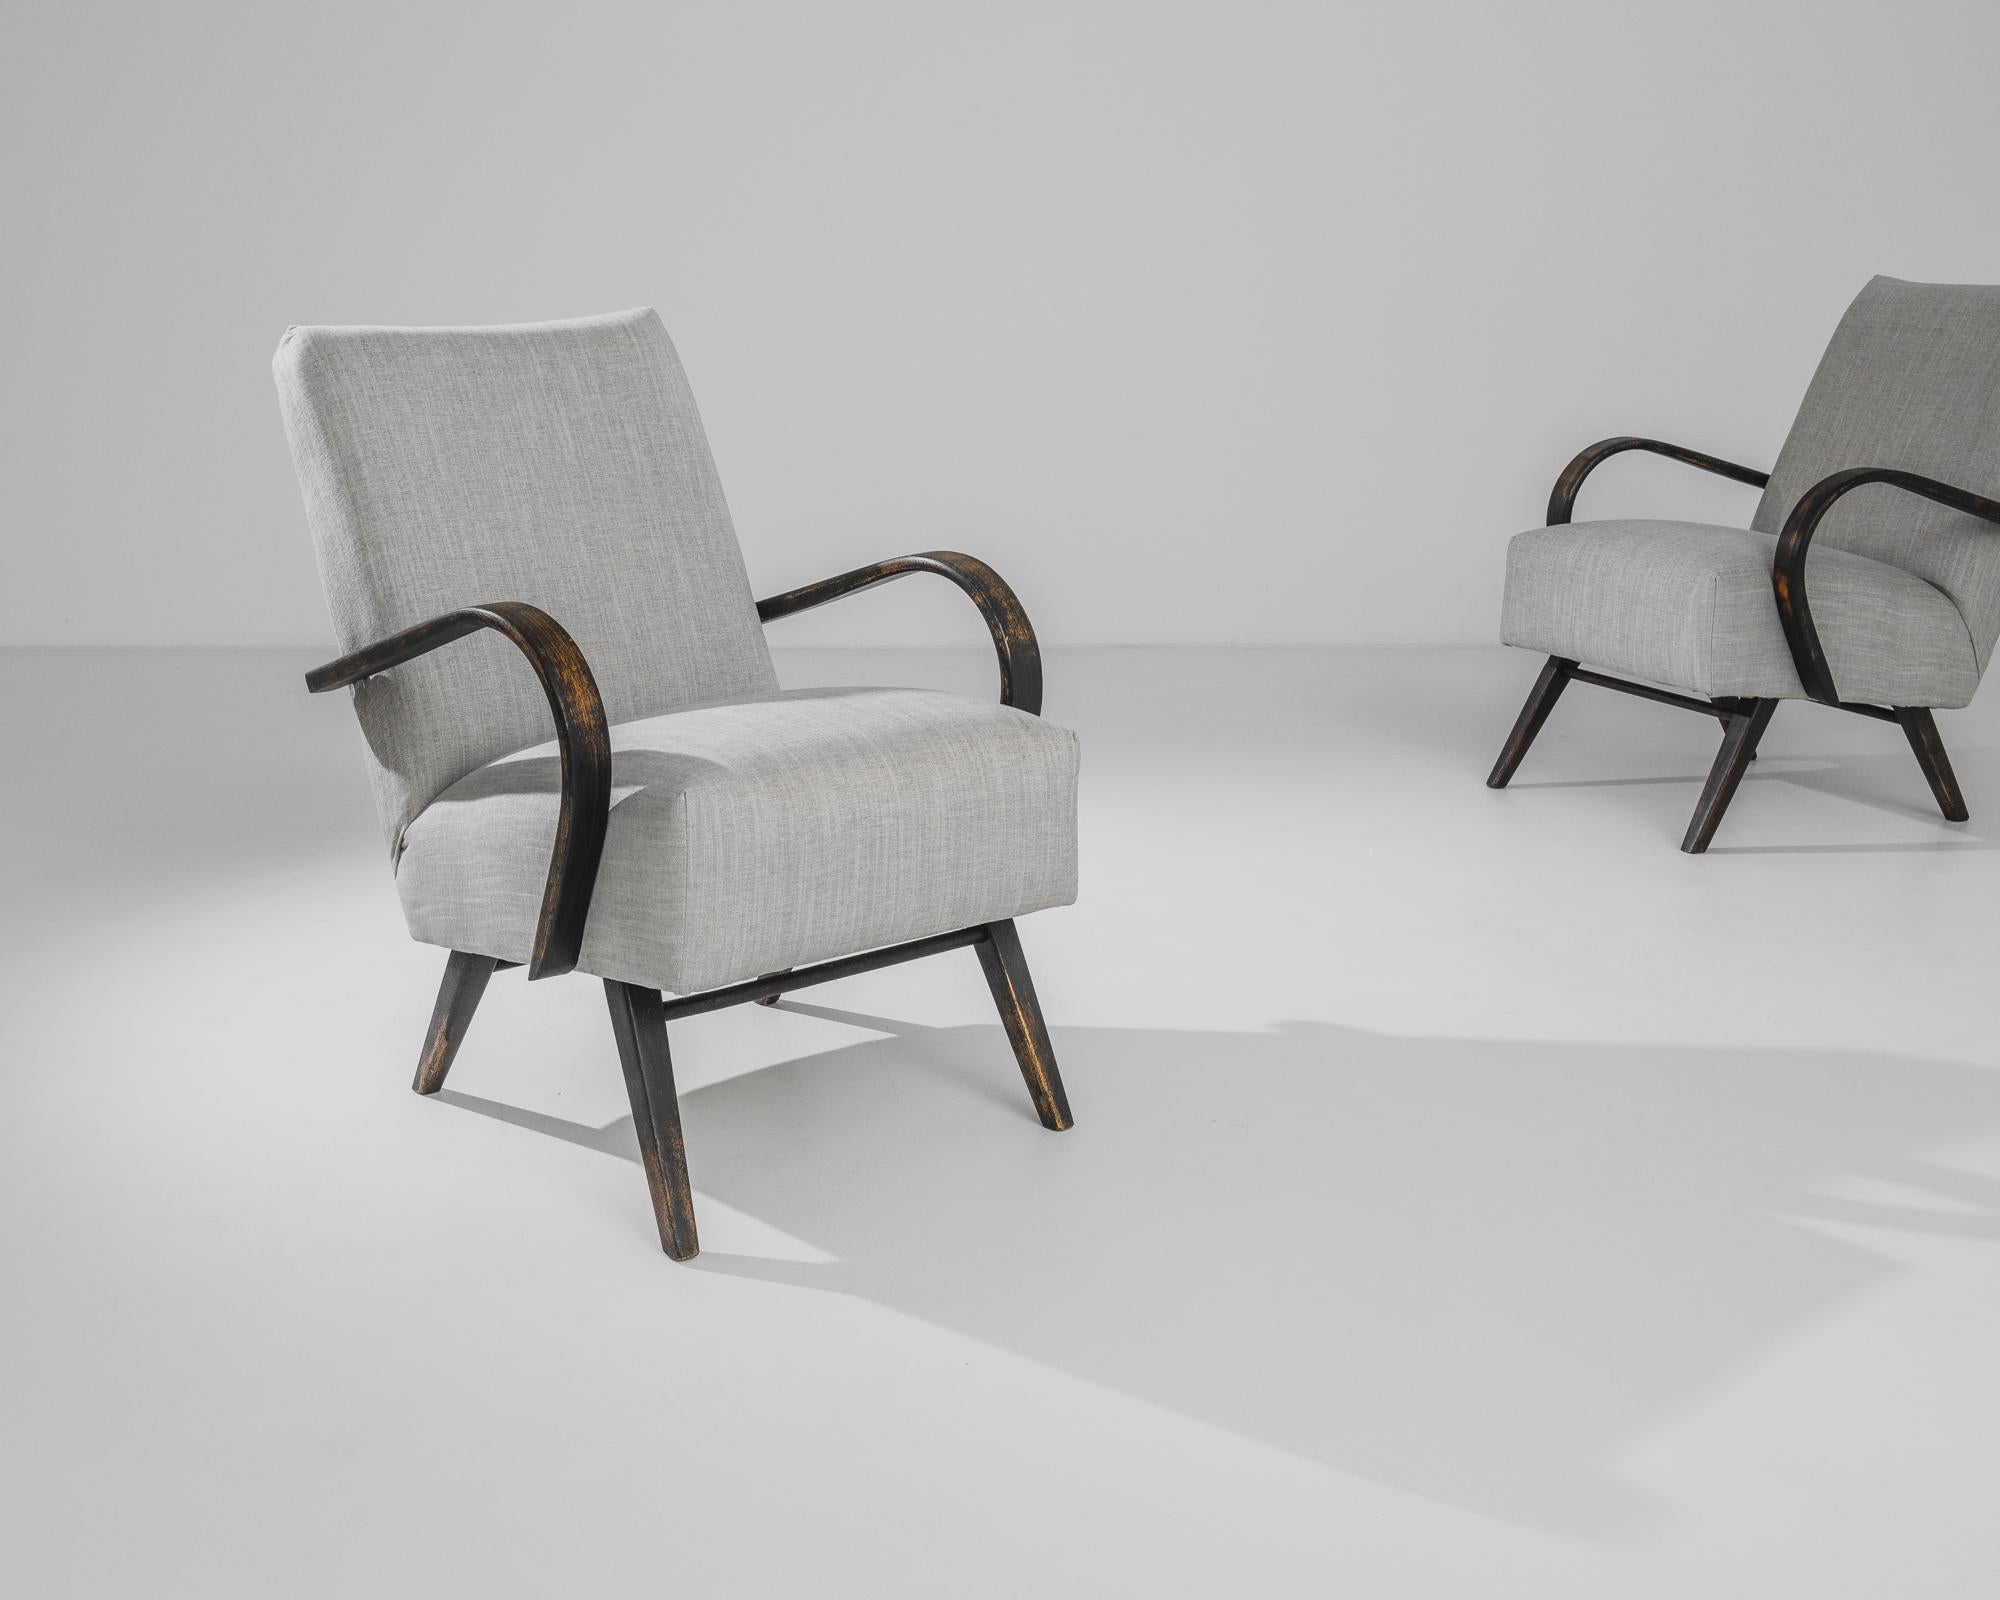 Indulge in mid-century modern design with this exquisite pair of 1950s Czech wooden armchairs by J. Halabala. The chairs showcase Halabala's signature flair for curvaceous forms and functional elegance. The dark, stained wood frames contrast